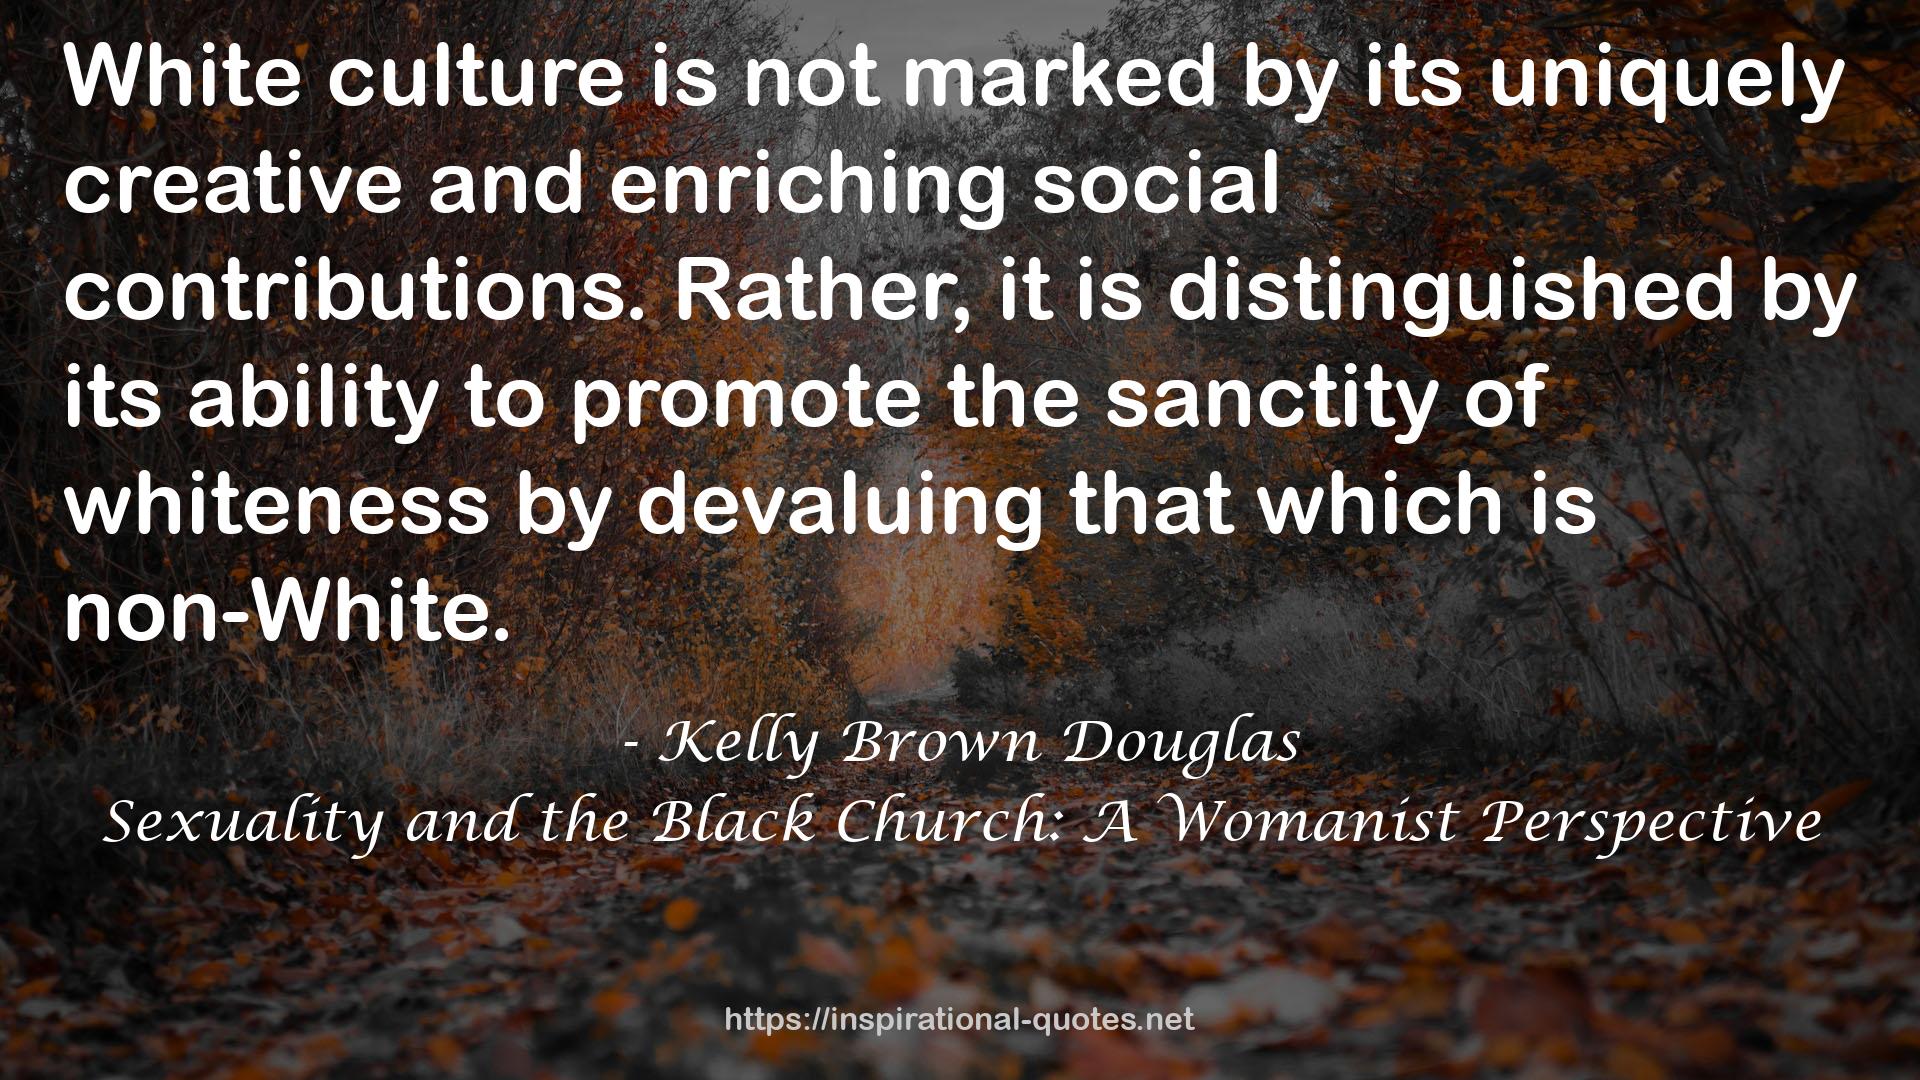 Sexuality and the Black Church: A Womanist Perspective QUOTES